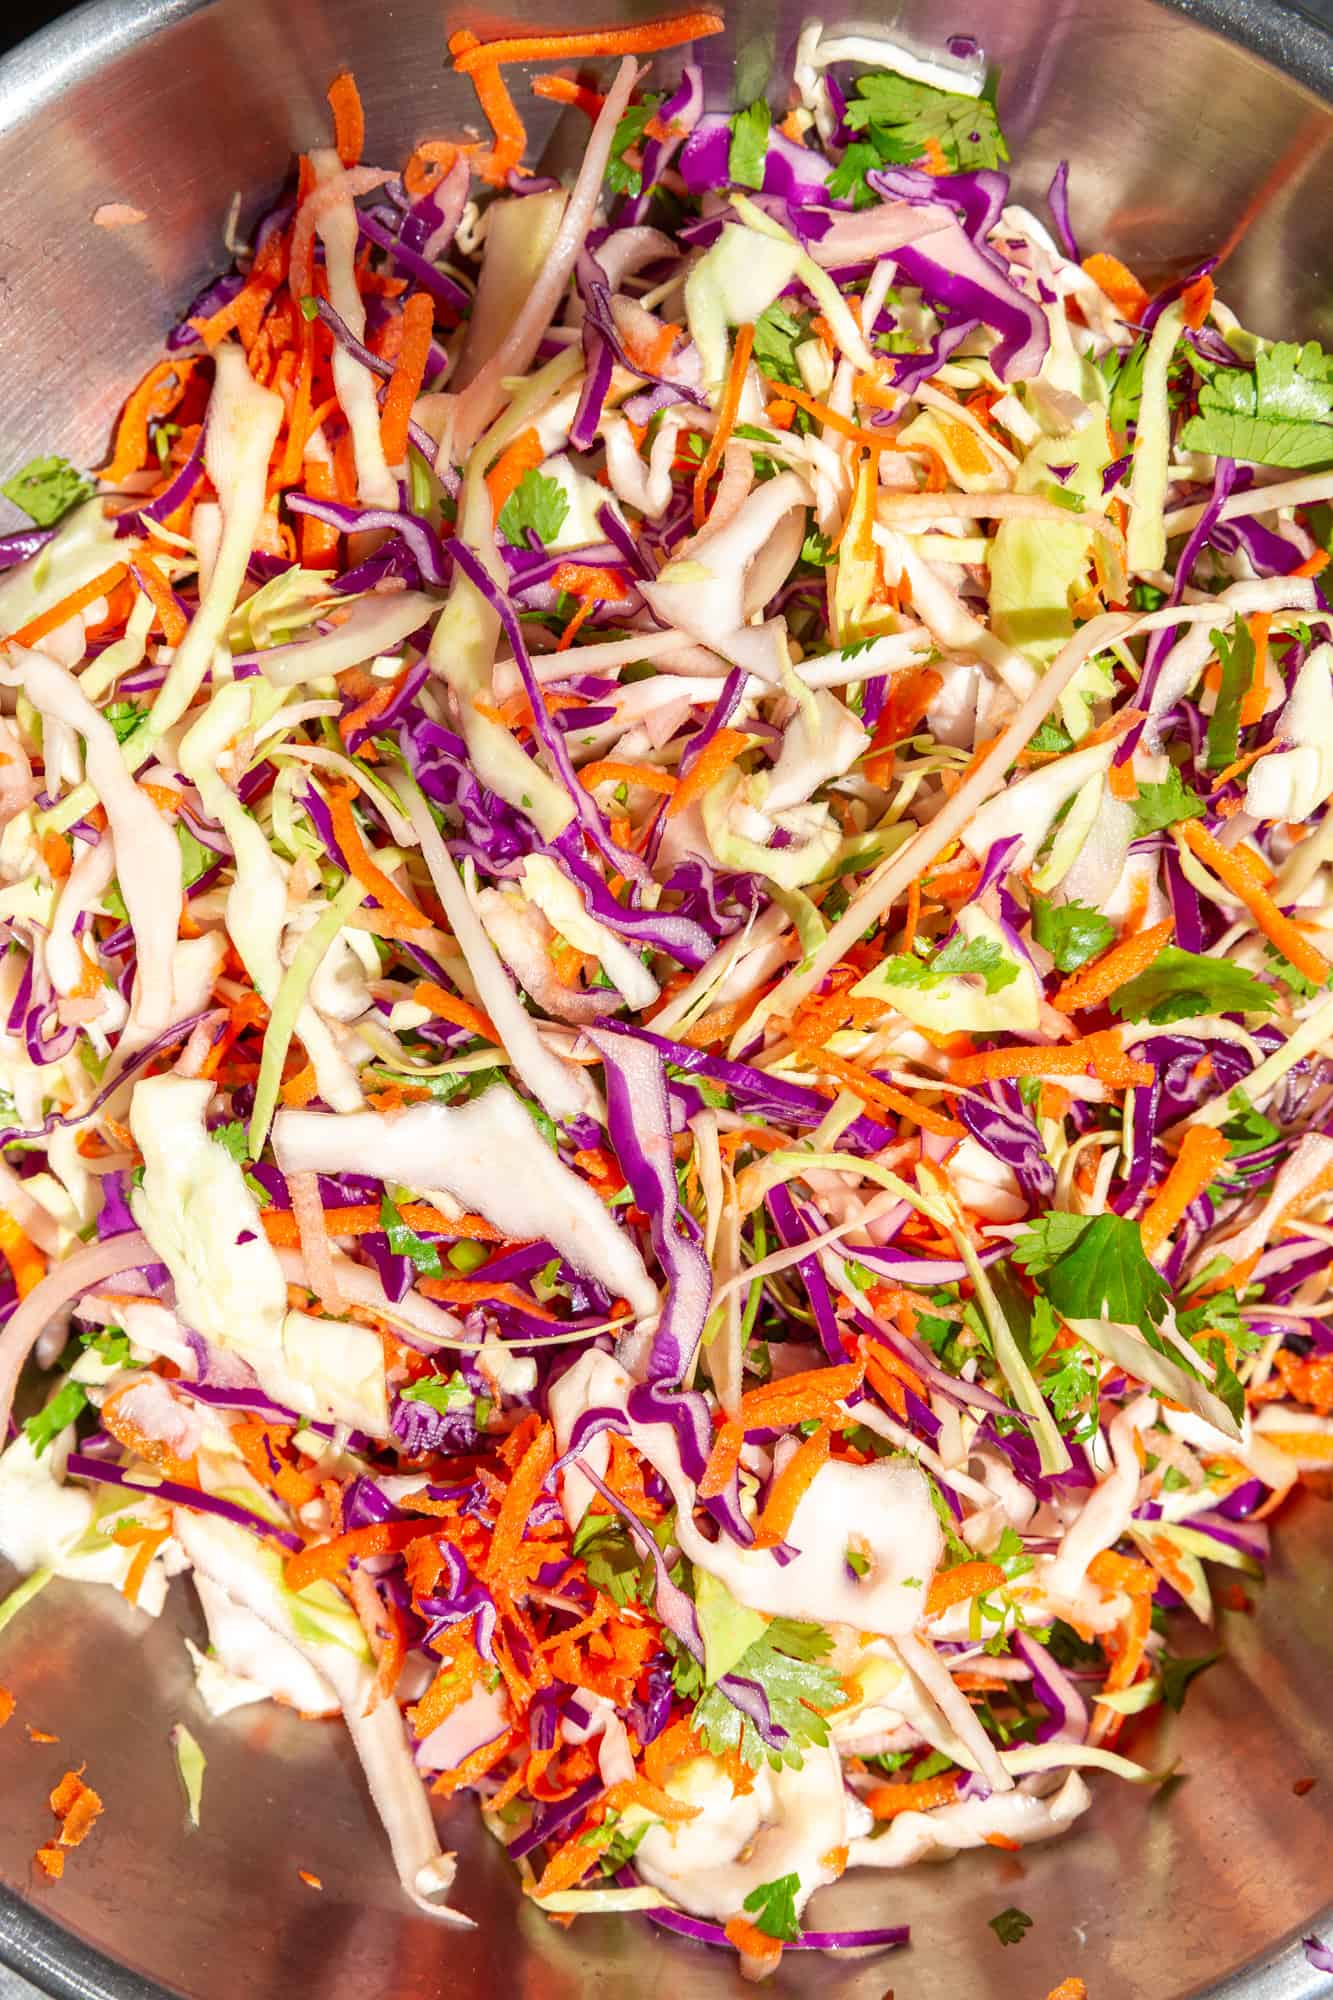 Sesame Cabbage Salad with Chicken and Green Apple